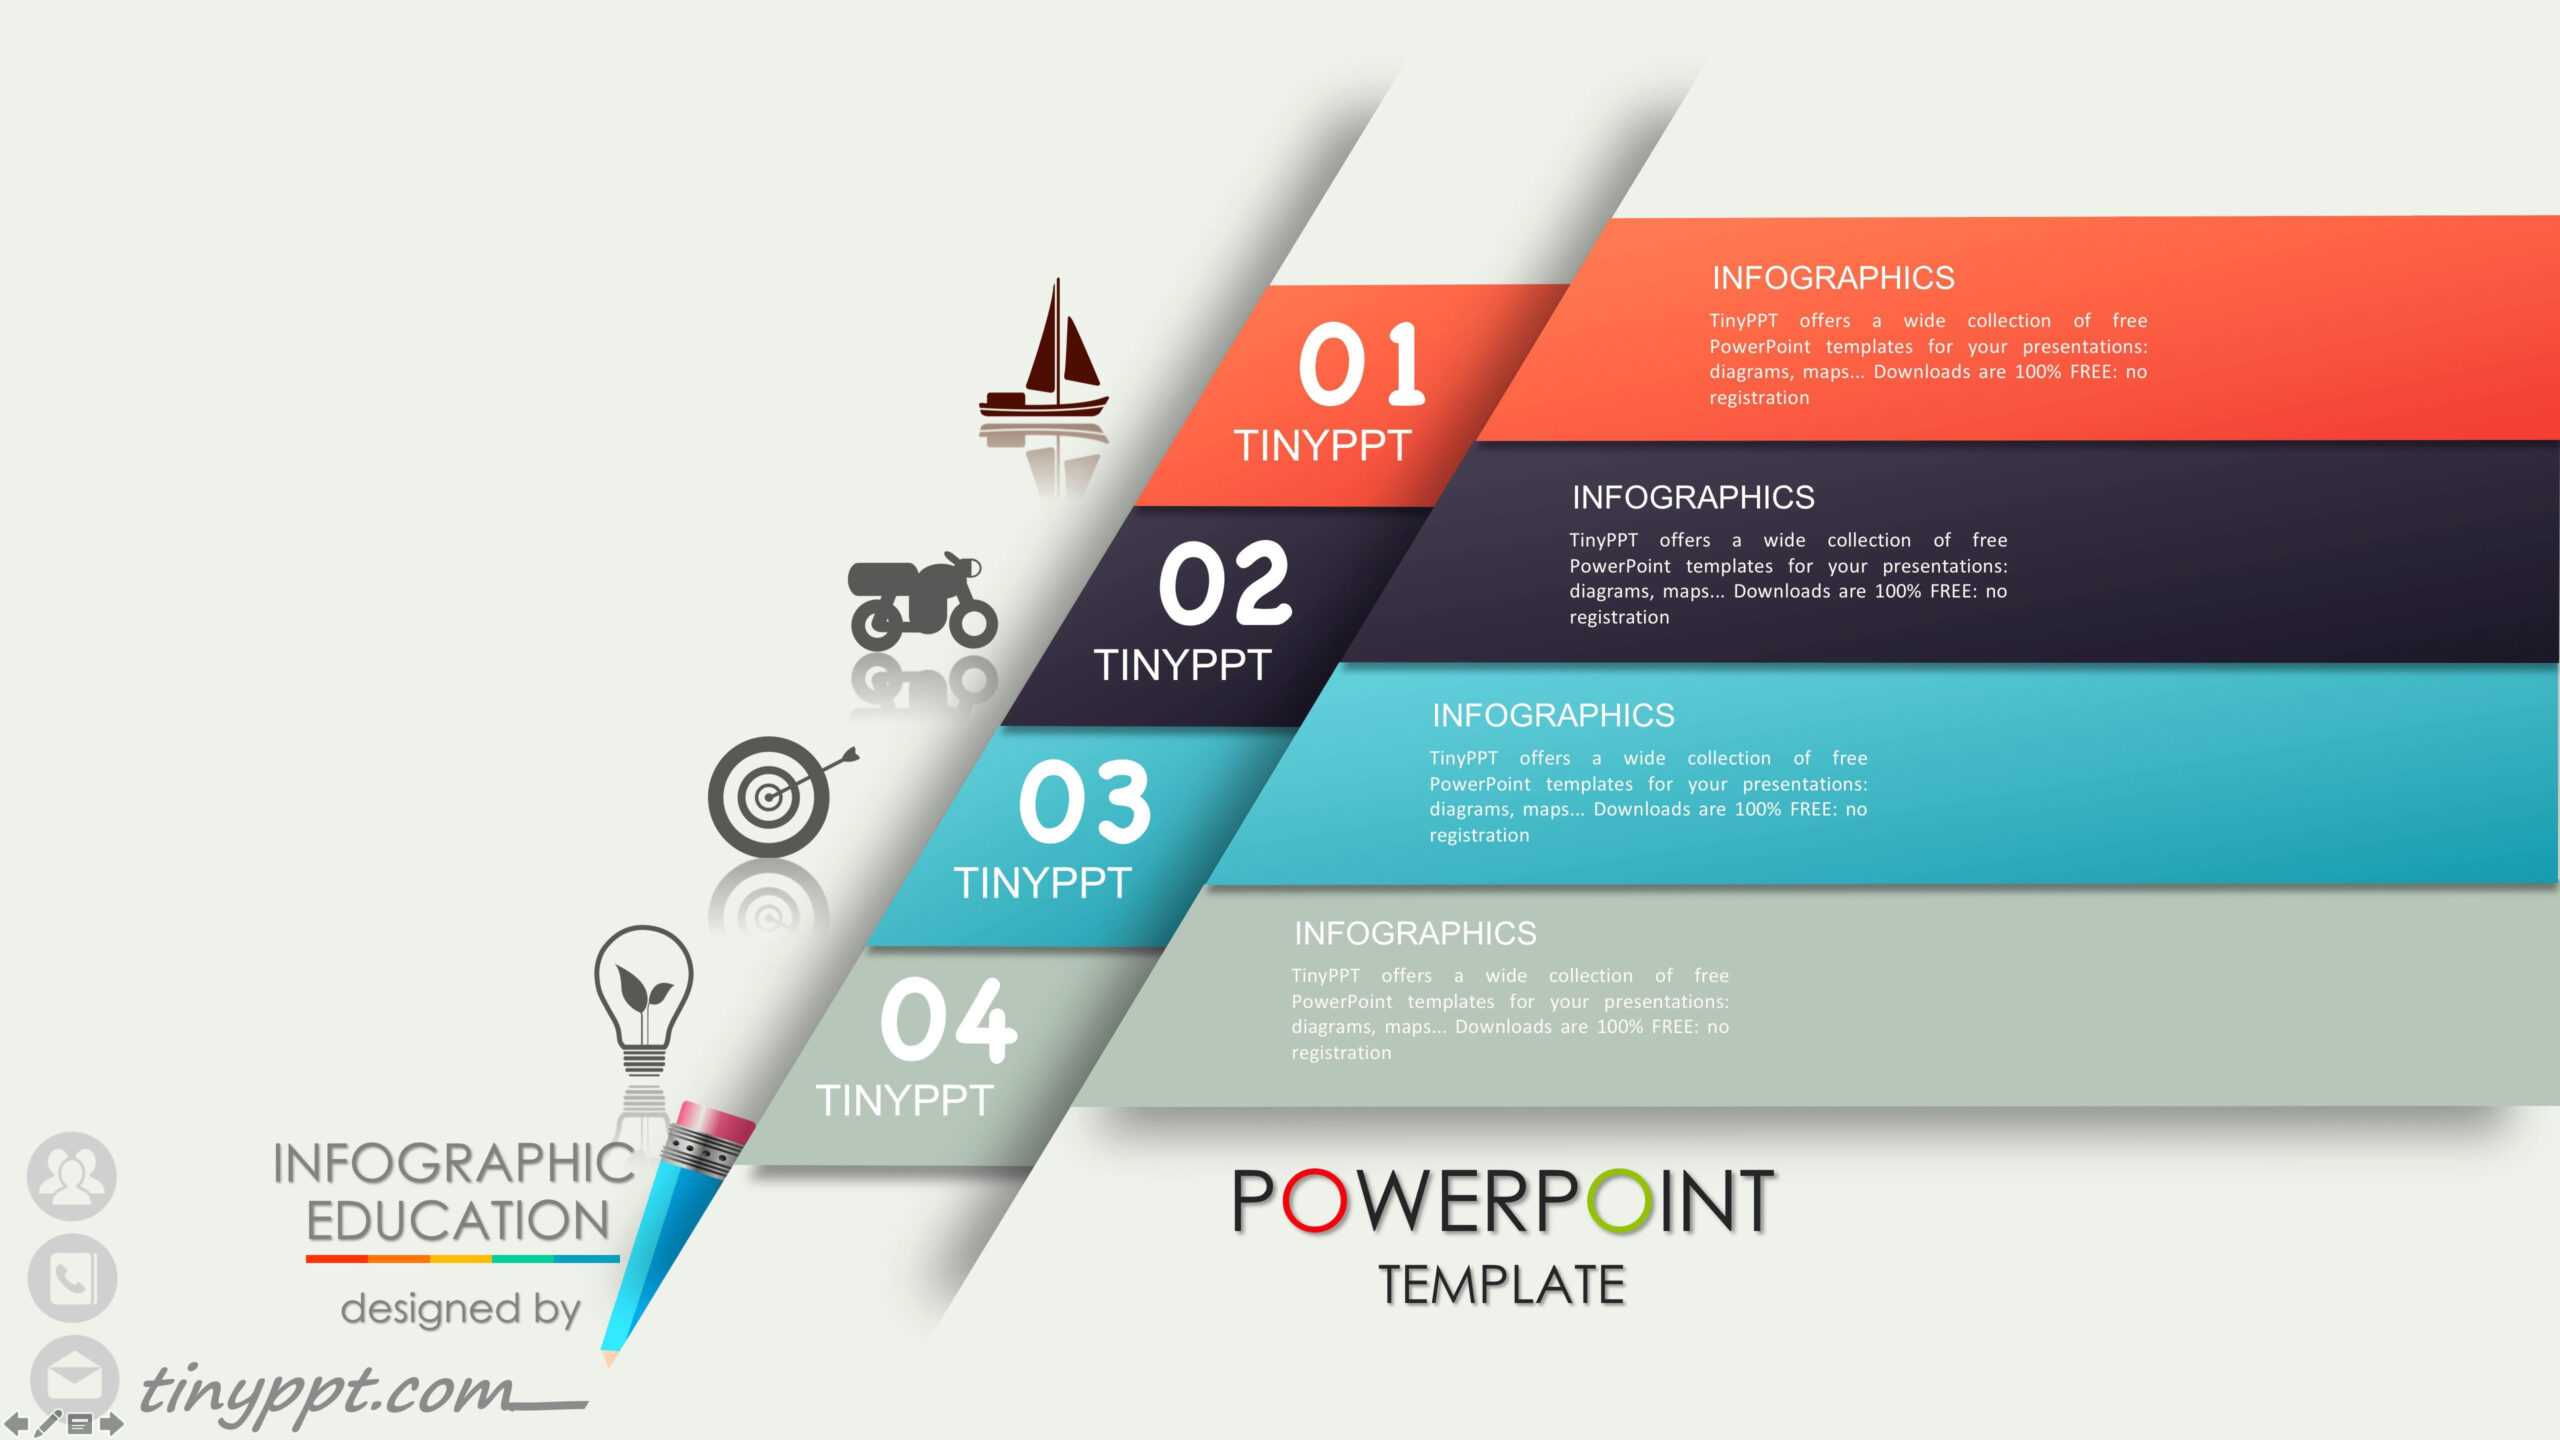 Free Download Templates For Powerpoint 2007 Business Slide In Powerpoint 2007 Template Free Download